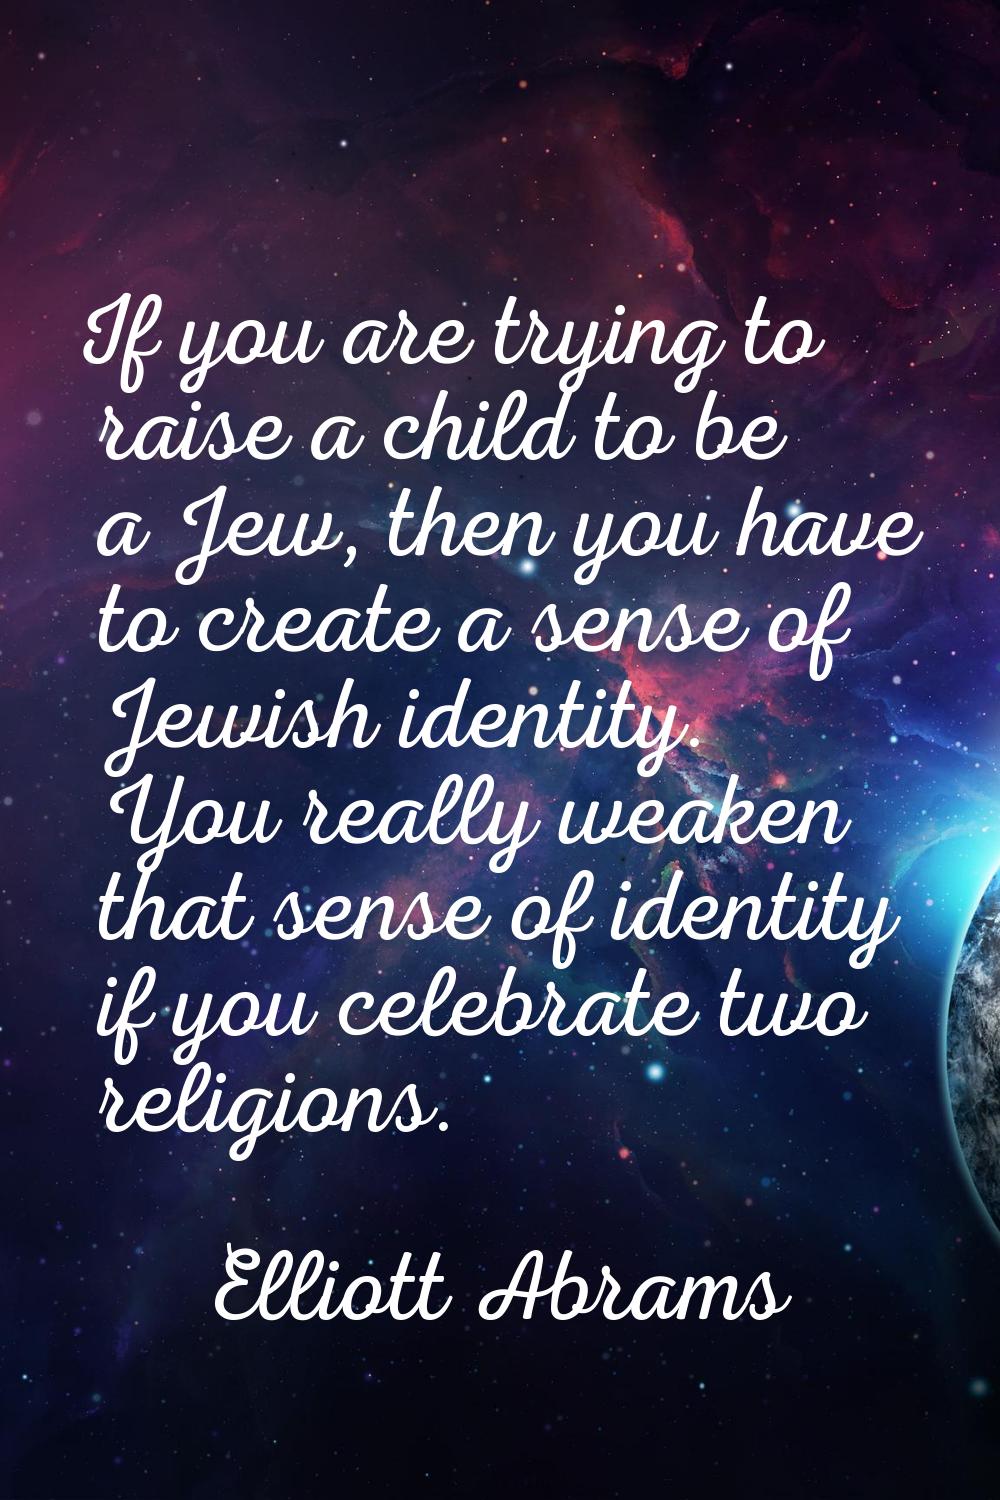 If you are trying to raise a child to be a Jew, then you have to create a sense of Jewish identity.